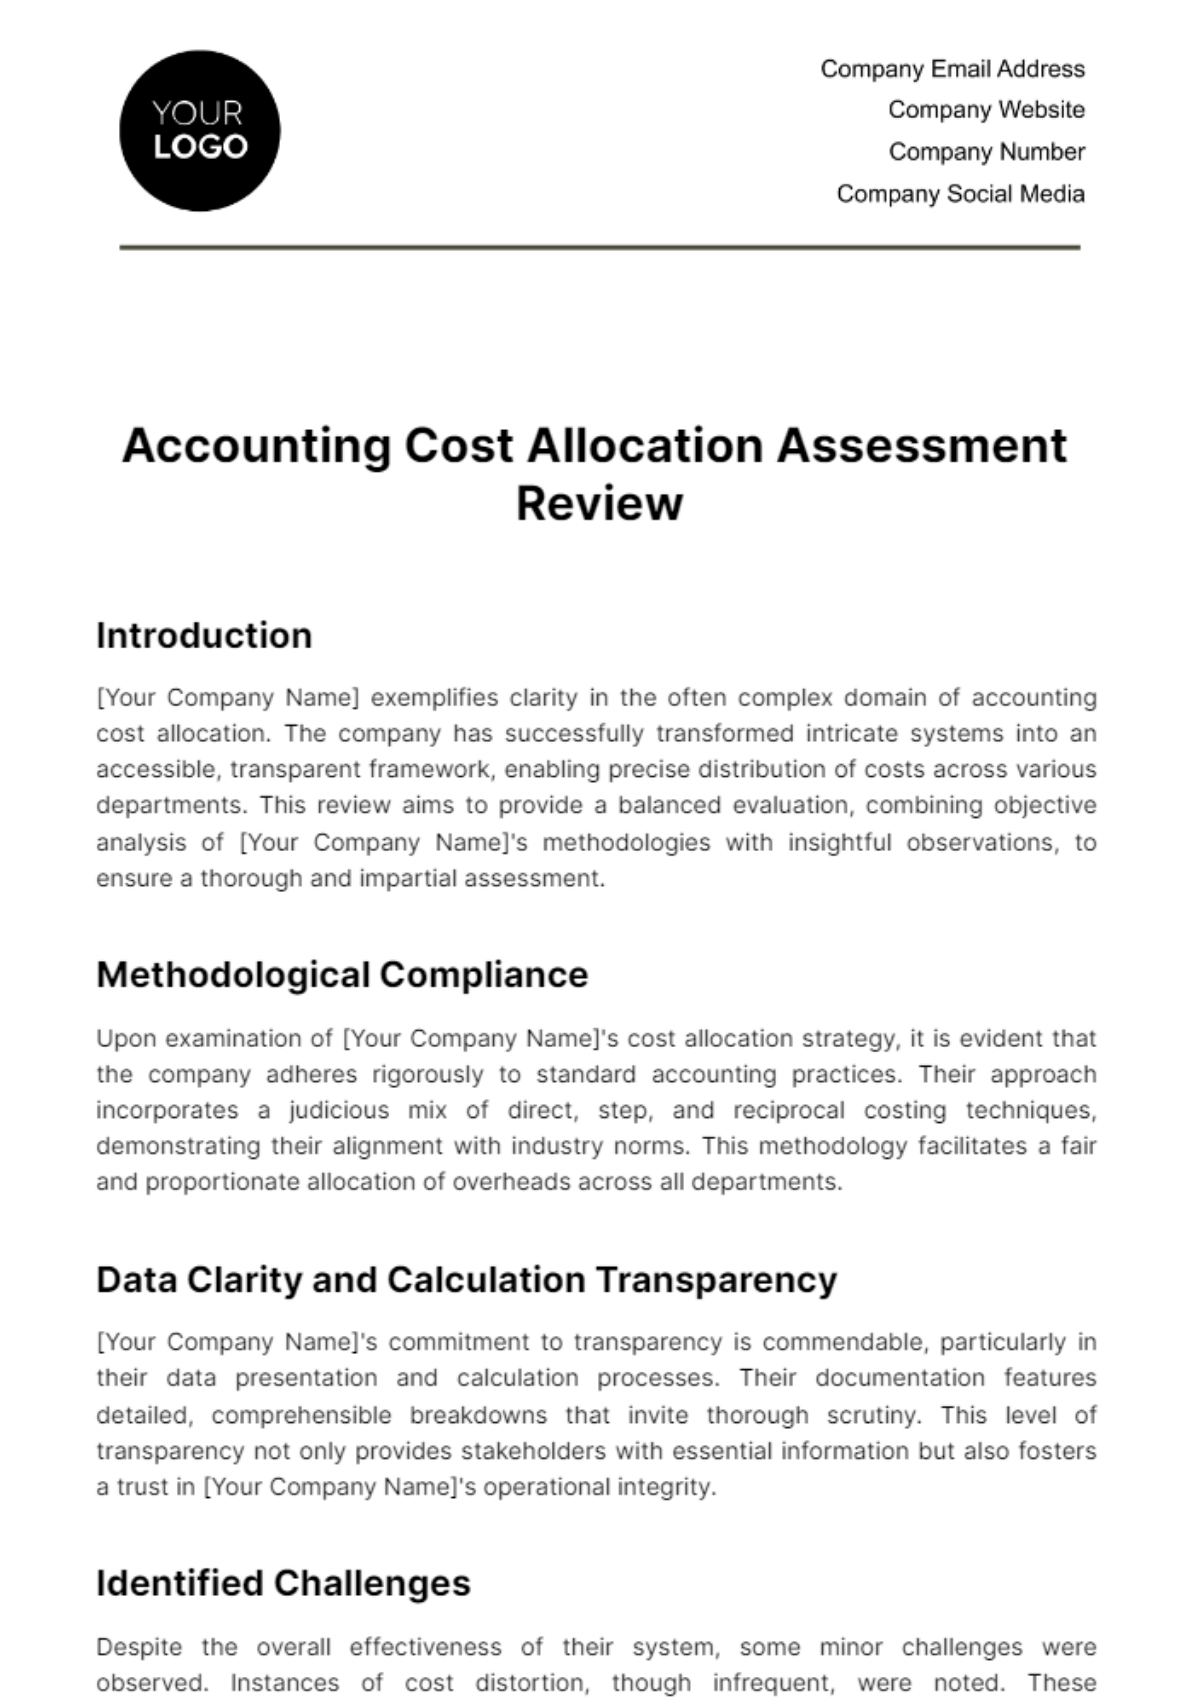 Free Accounting Cost Allocation Assessment Review Template